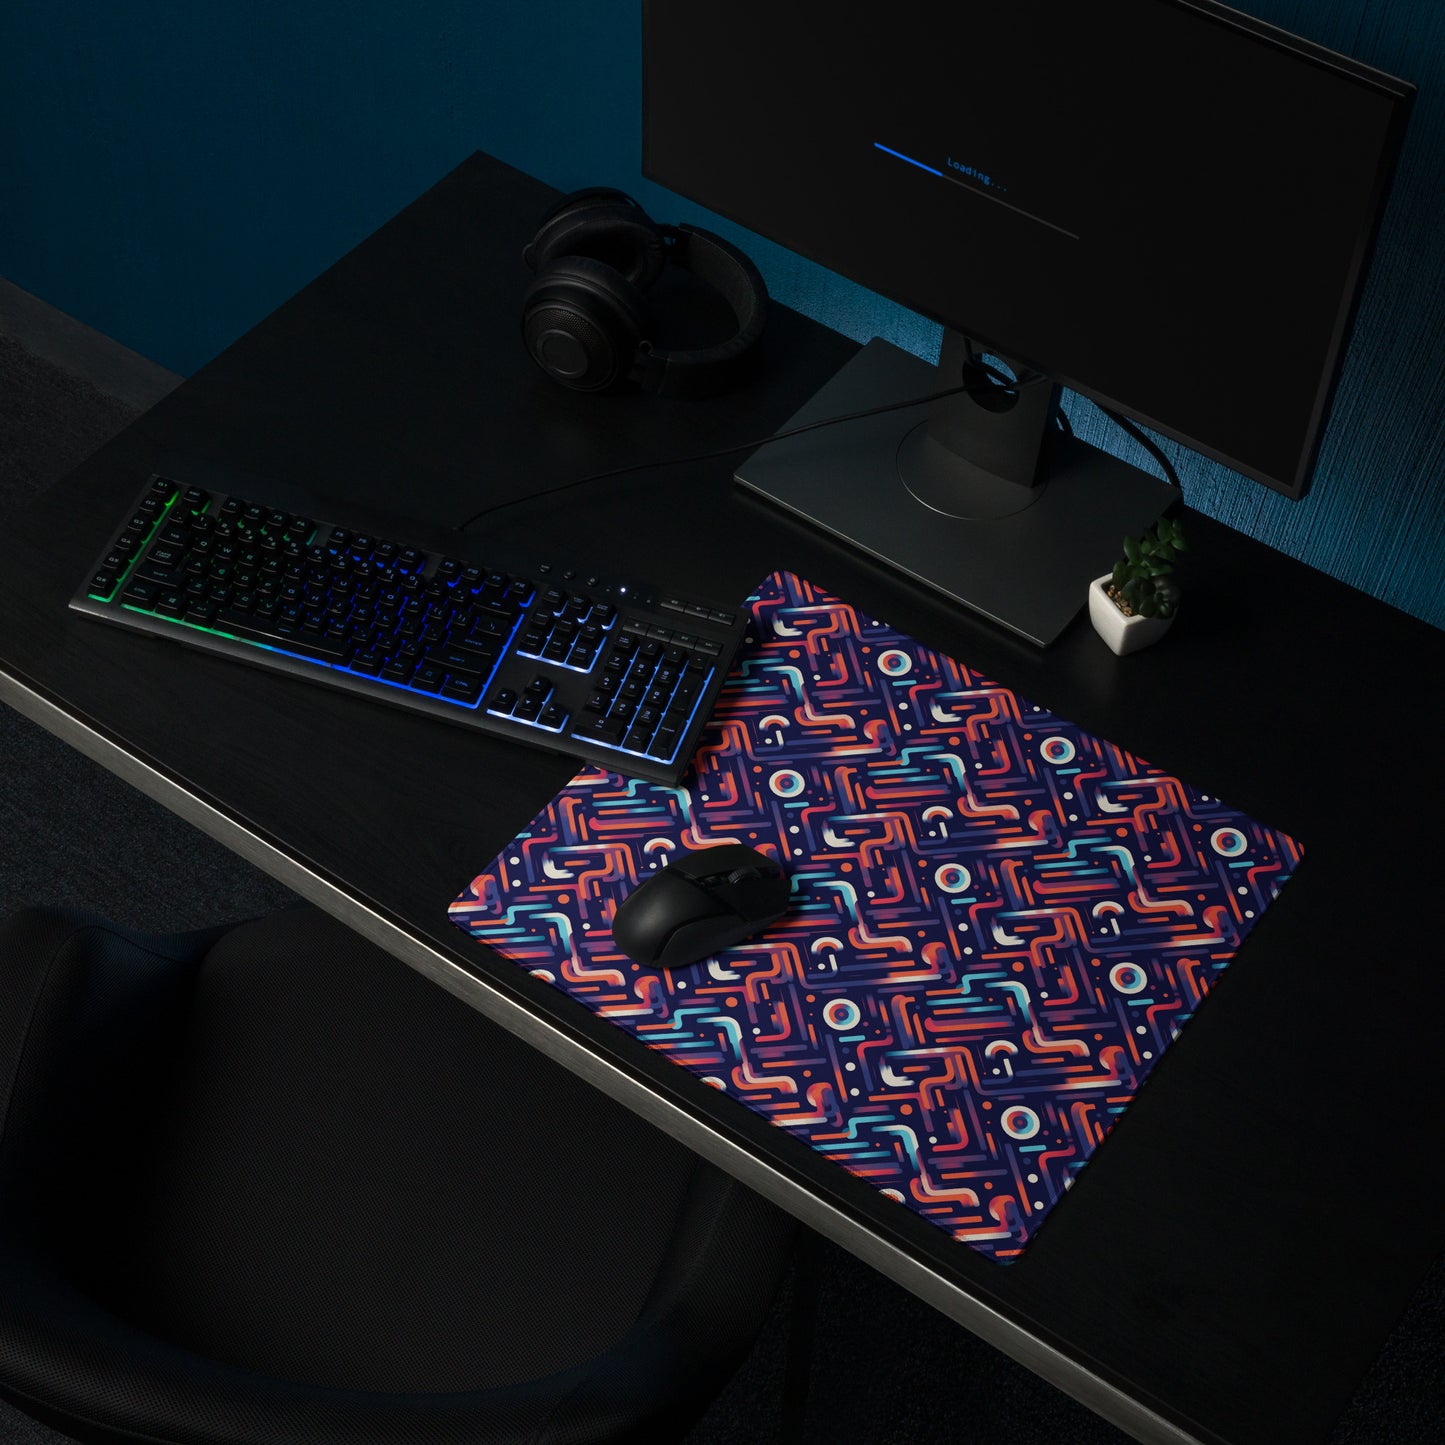 An 18" x 16" gaming desk pad with blue, orange, and purple lines on a dark blue background. A keyboard and mouse sit on it.